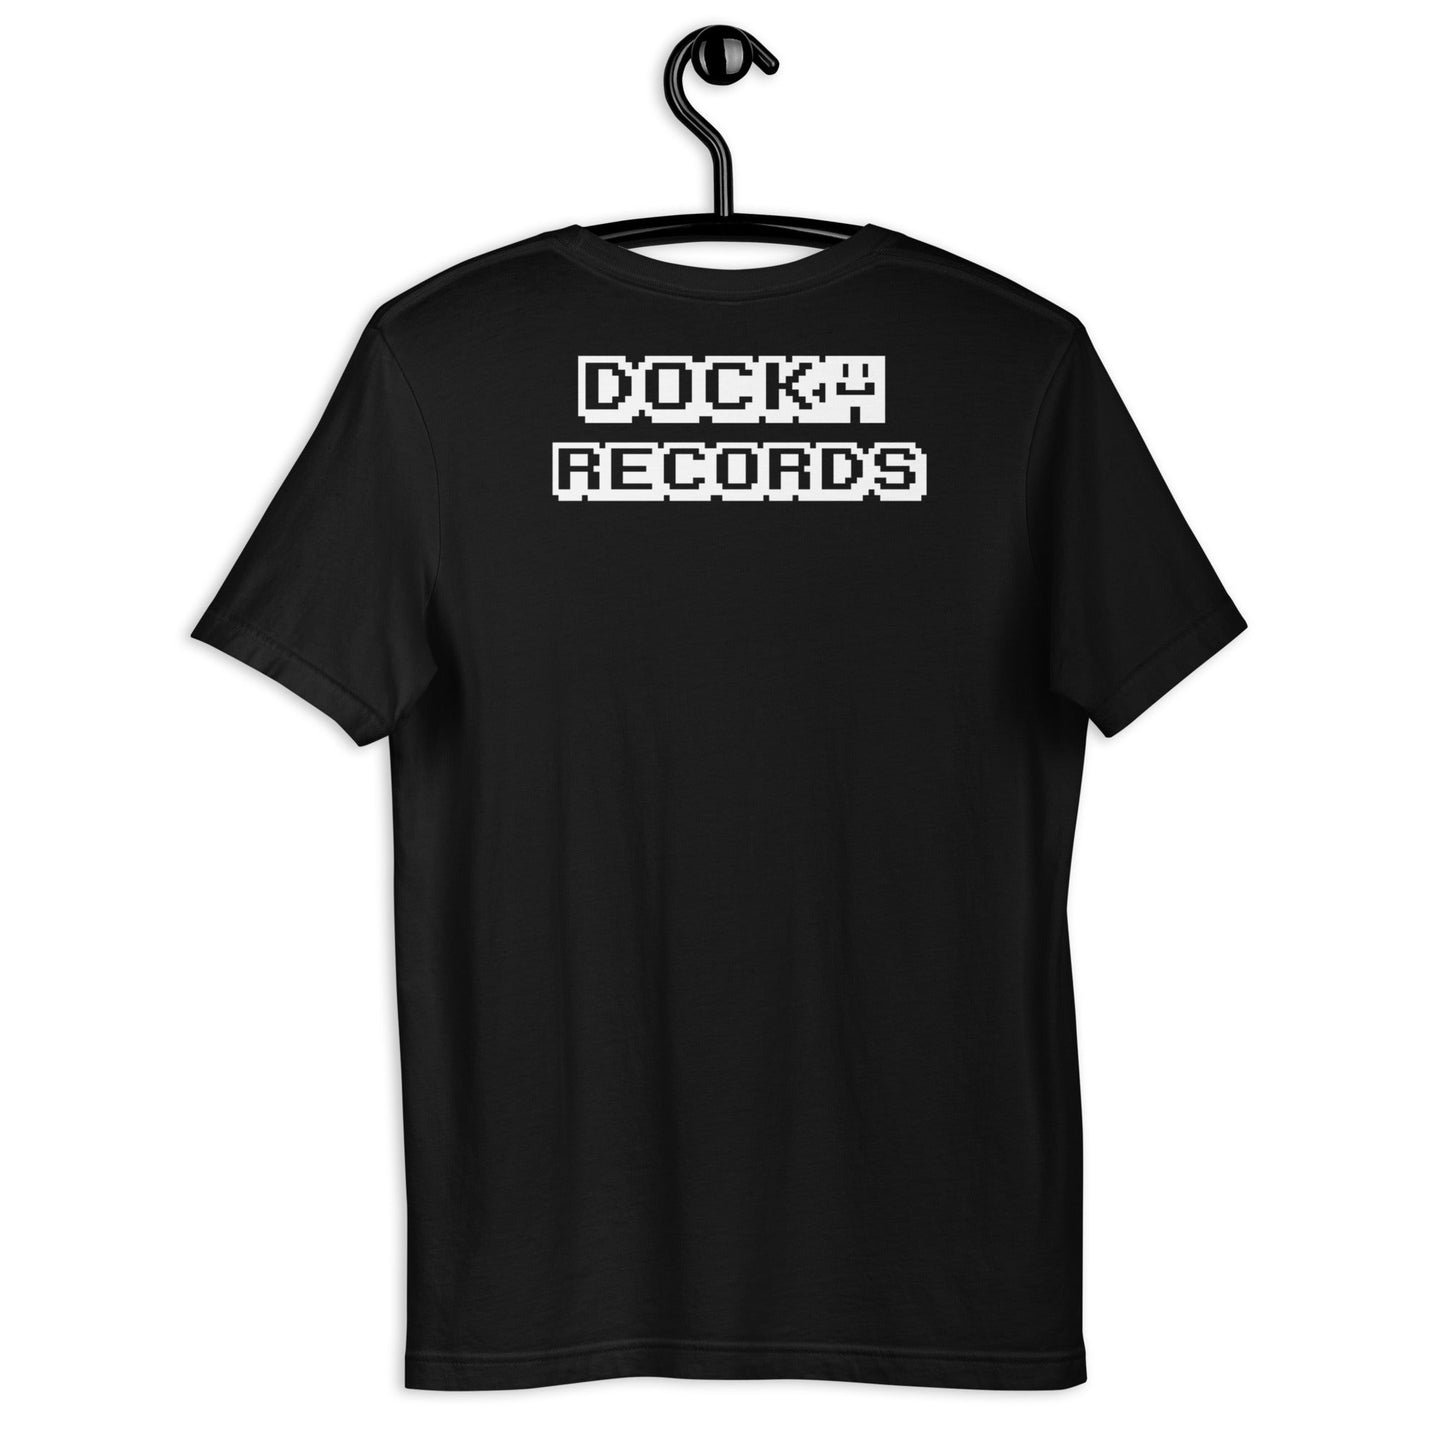 Docka Records Farris Wheel Special Unisex T-shirt - BeExtra! Apparel & More